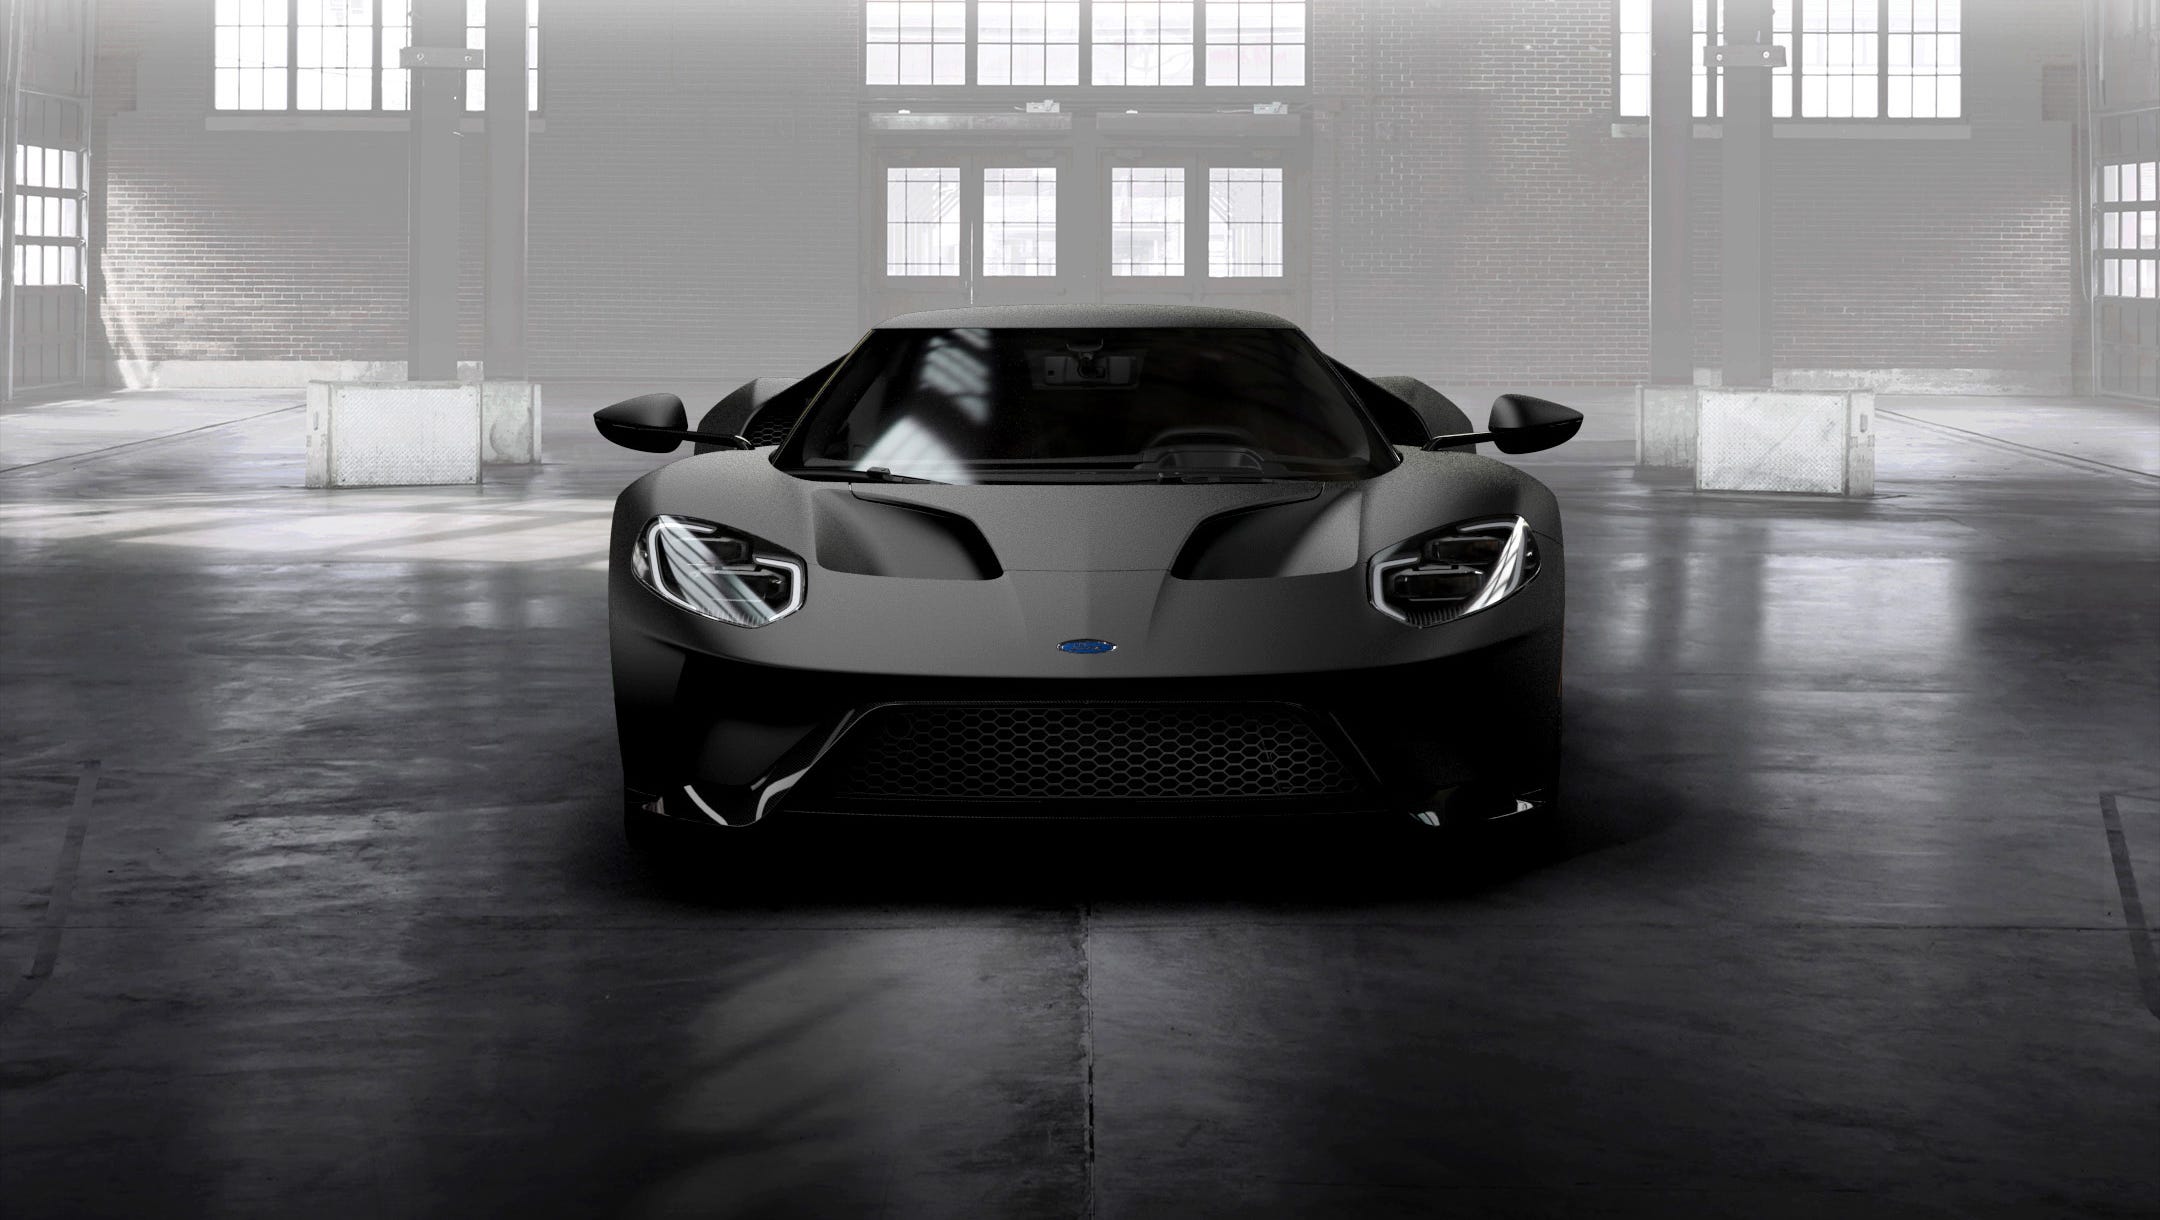 The teardrop-shape carbon-fiber body is the result of extensive work in the wind tunnel.